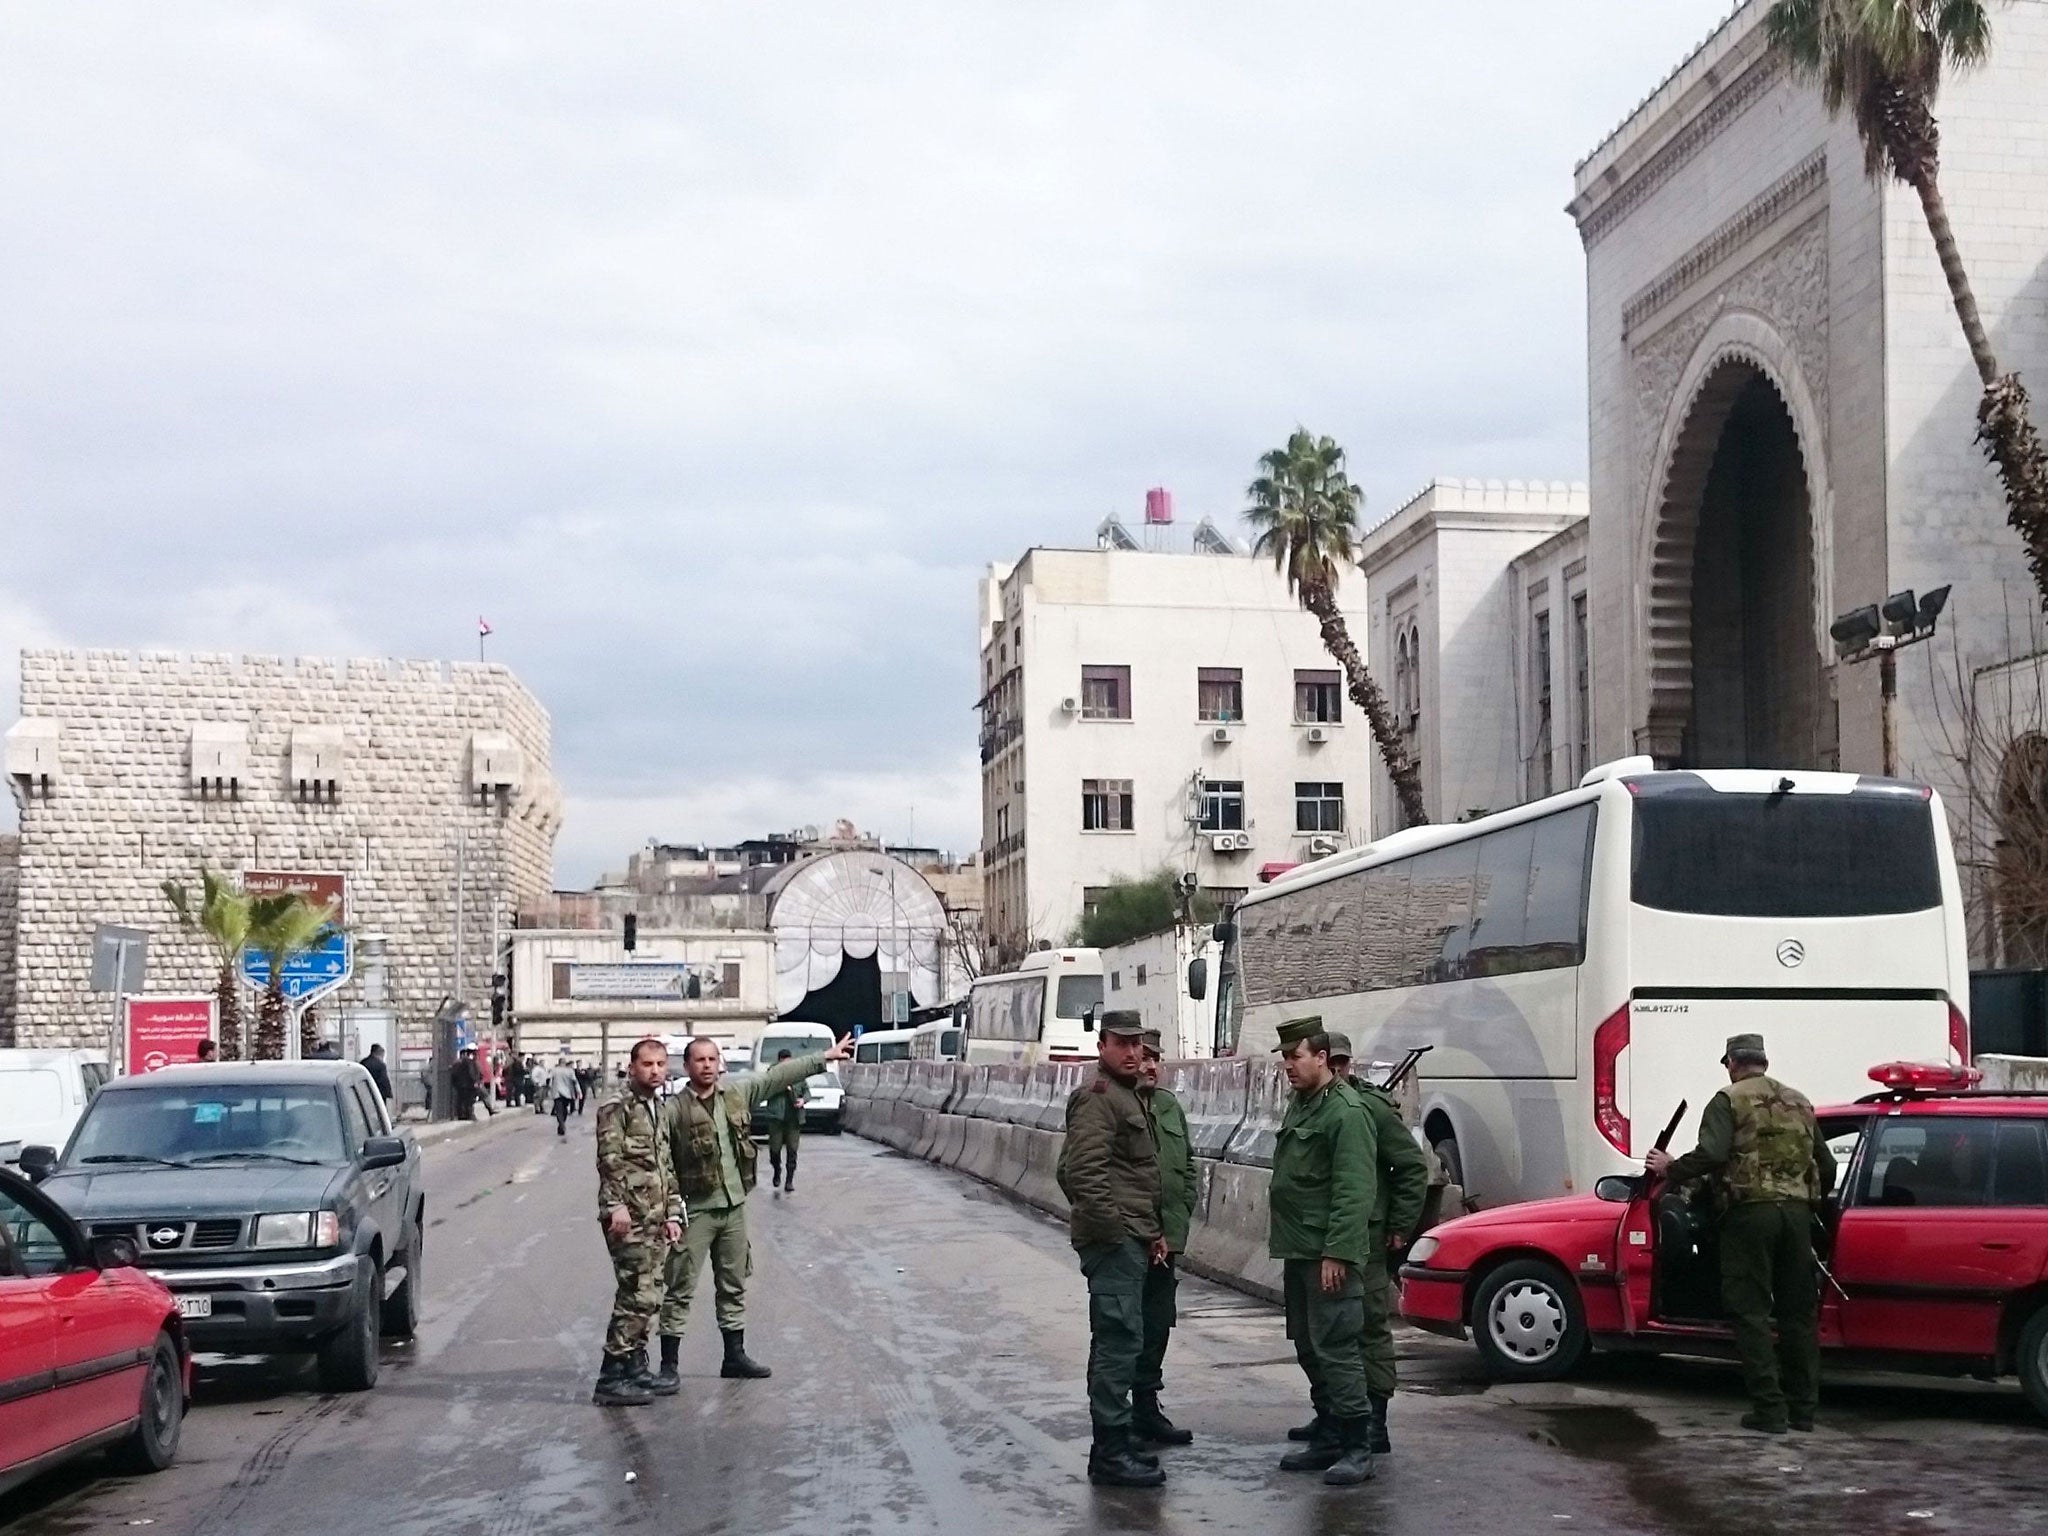 Syrian security forces cordon off the area following a suicide bombing at the Palace of Justice building in Damascus on 15 March